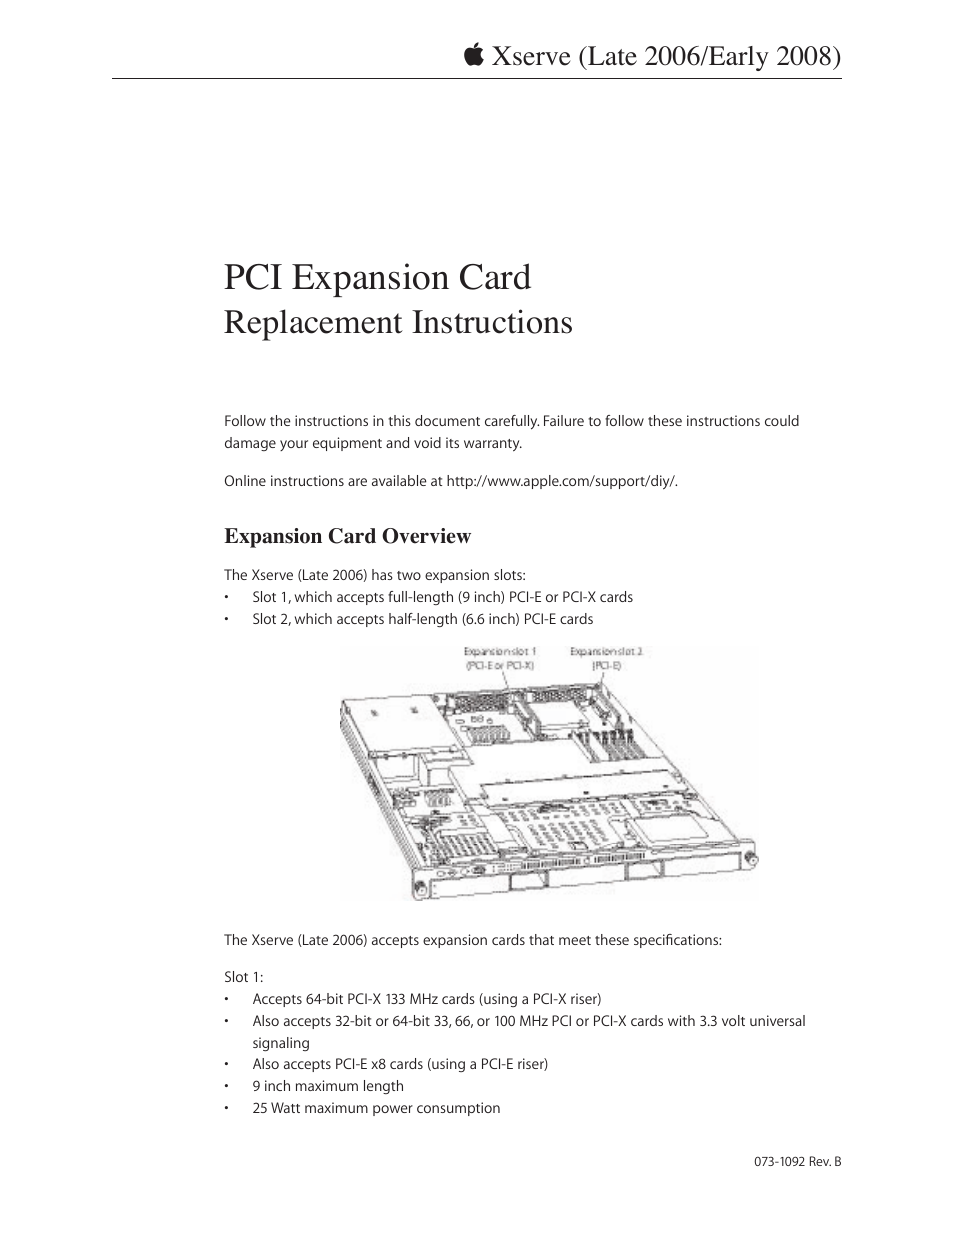 Xserve (Early 2008) DIY Procedure for Expansion Card